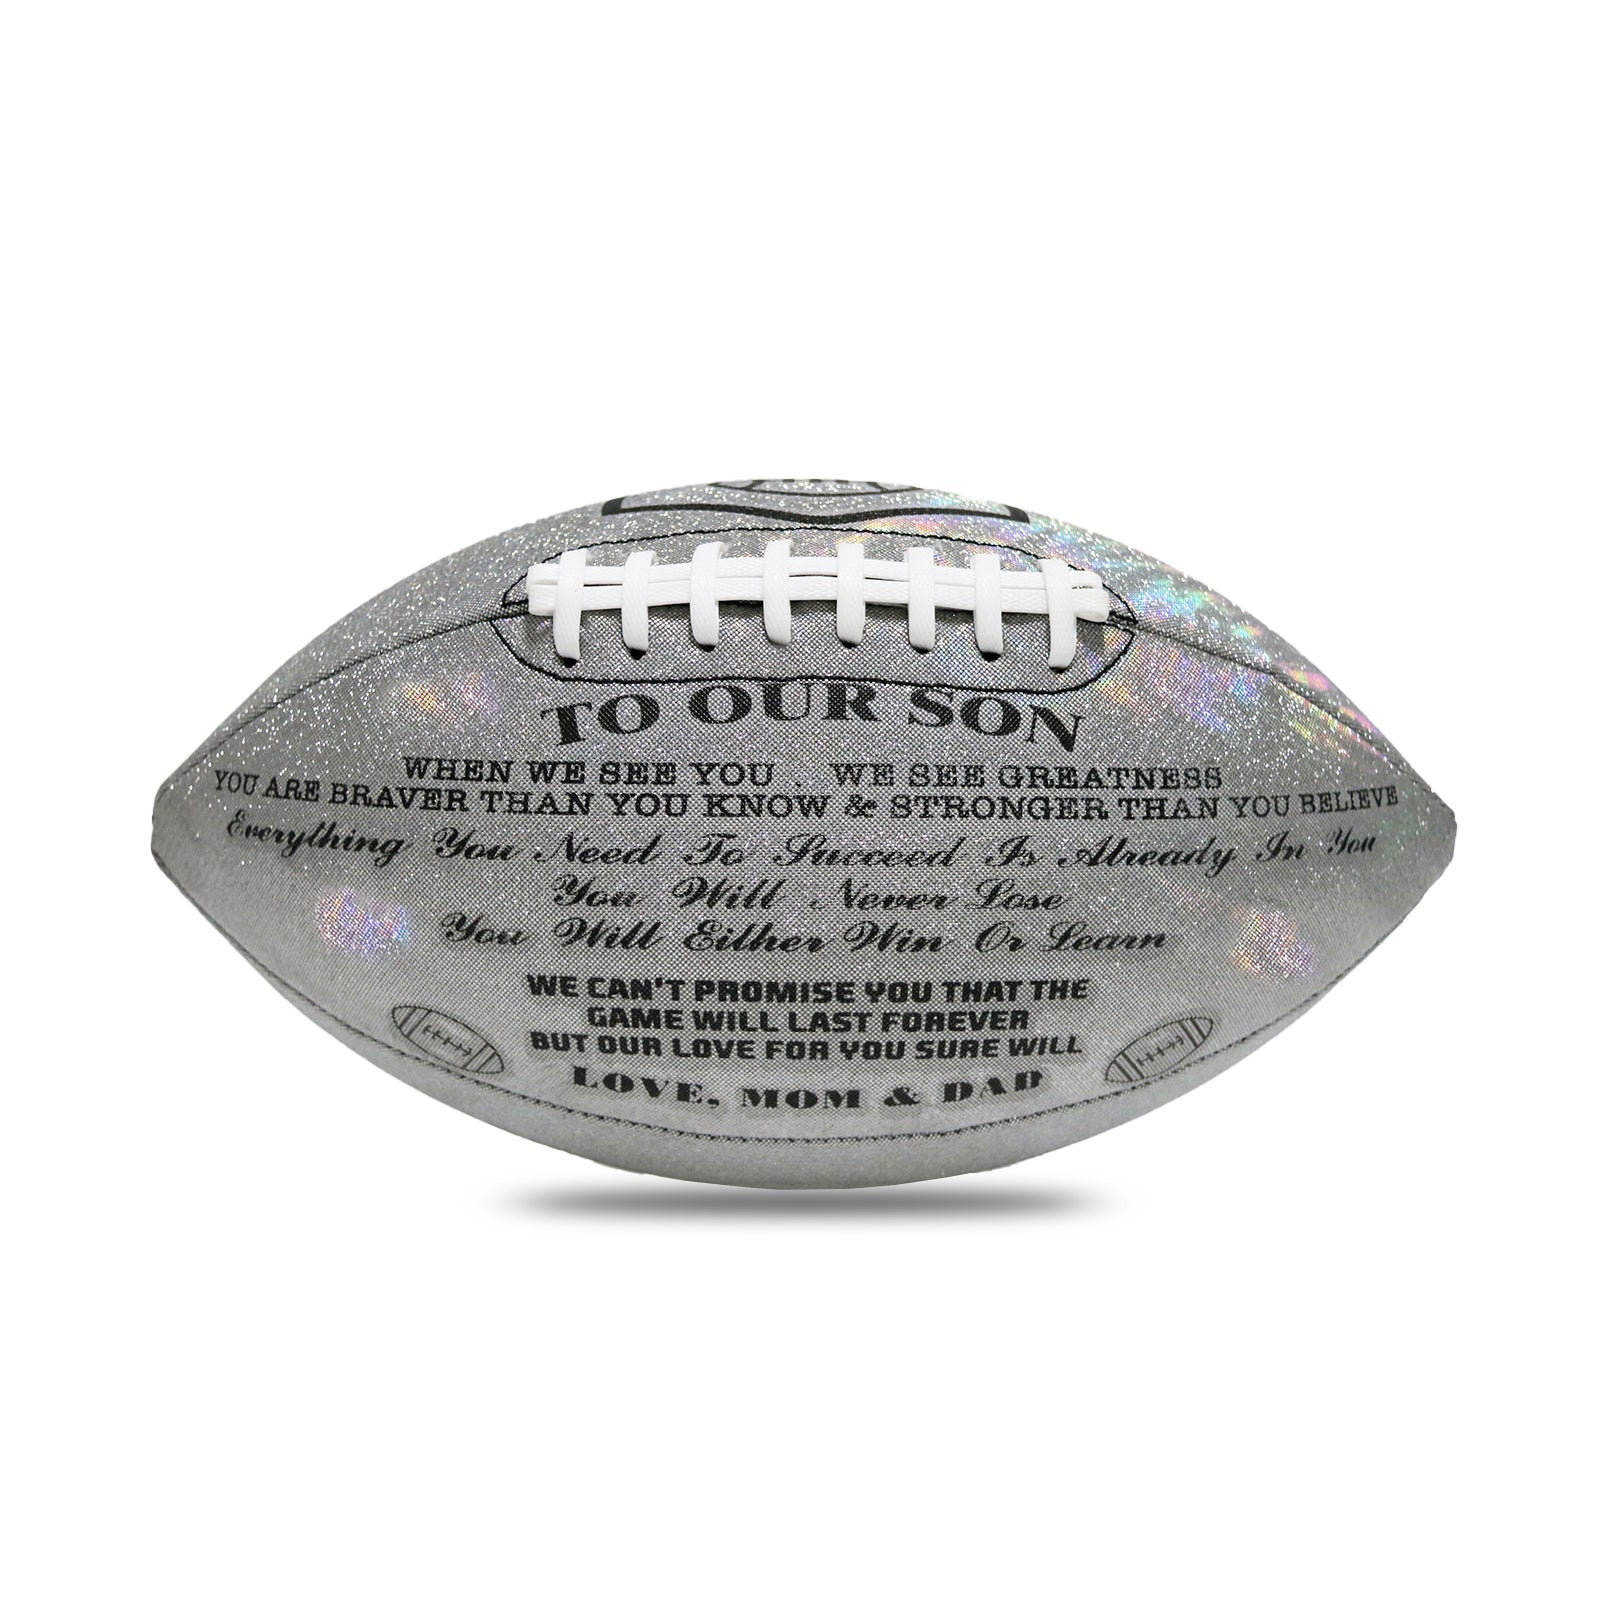 To Our Son - Love You Birthday Graduation Christmas Holiday Gift With Cool Reflective Iridescent Personalized Football - Family Watchs